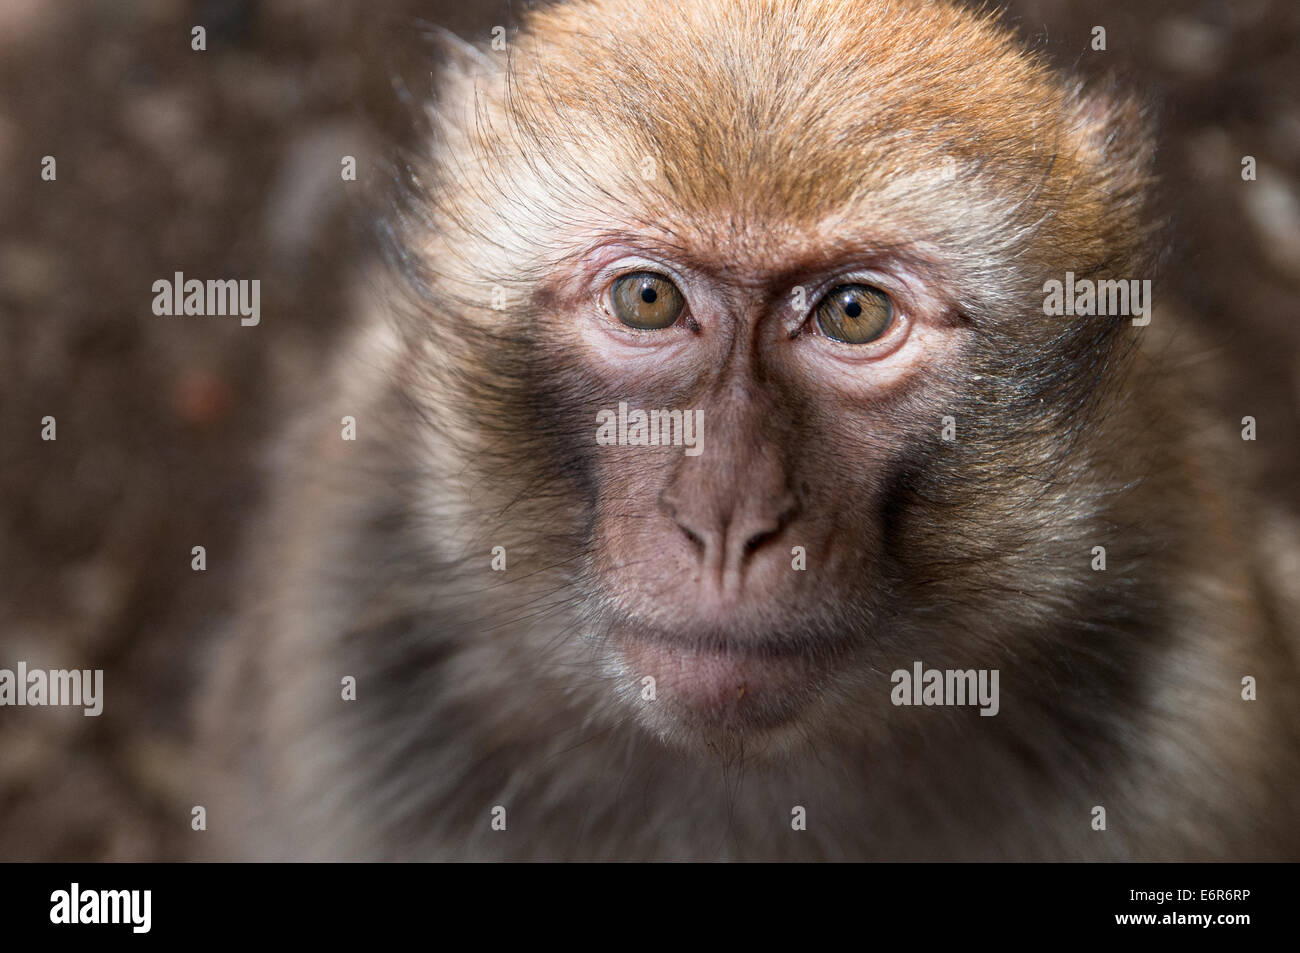 A baby monkey is looking surprised Stock Photo